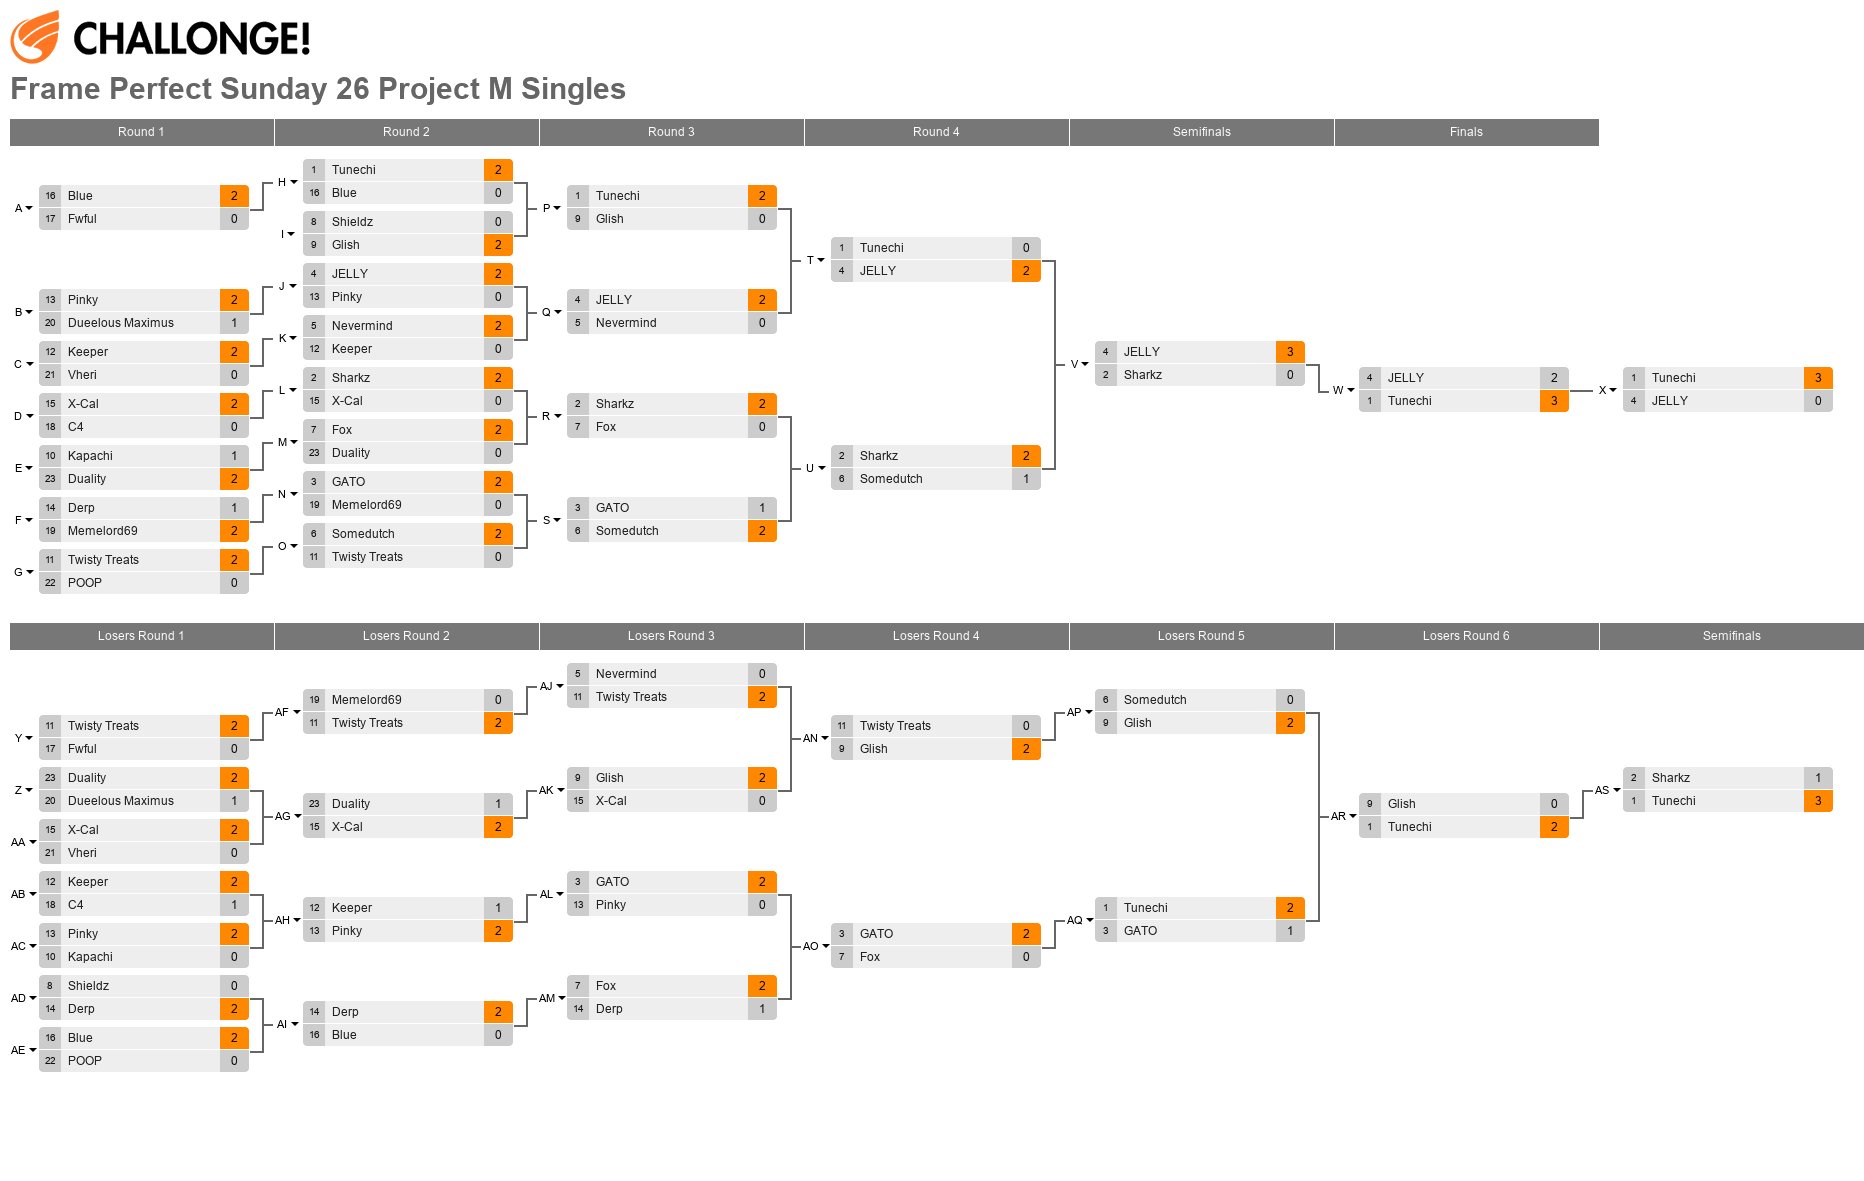 Frame Perfect Sunday 26 Project M Singles